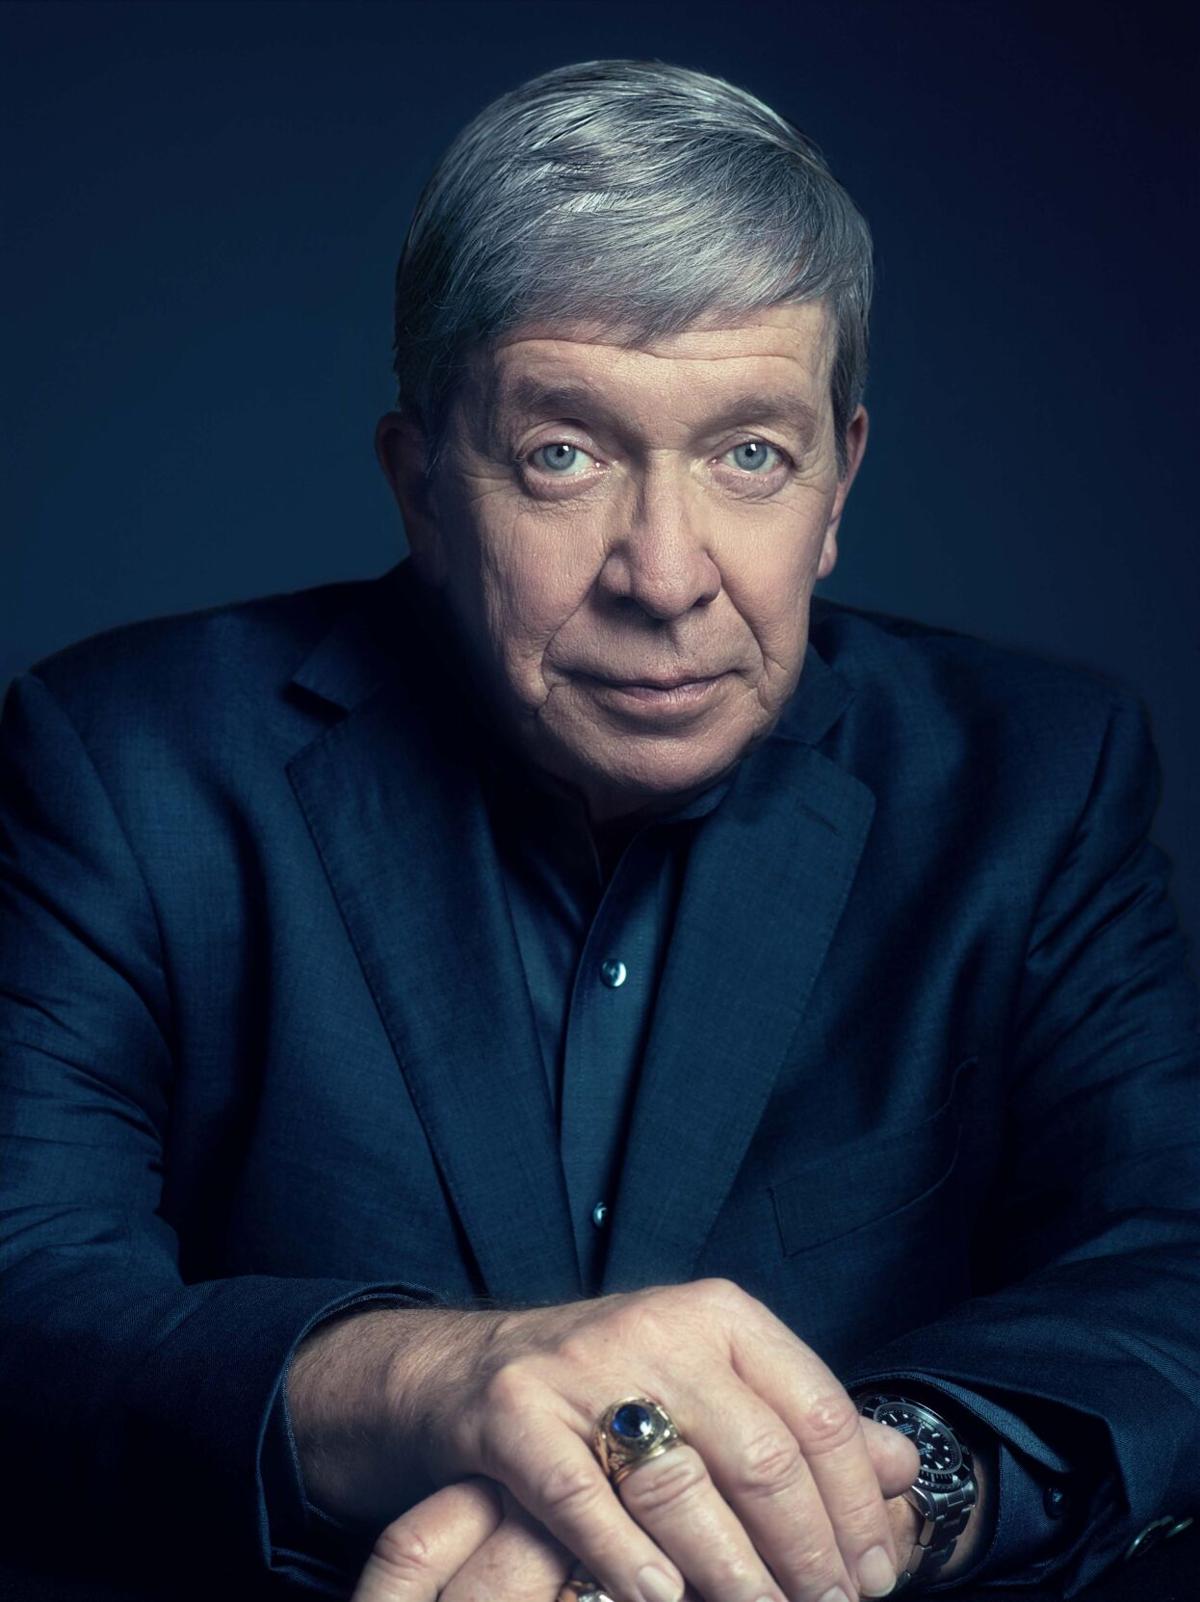 Joe Kenda on his new series, the pandemic and why criminals are morons